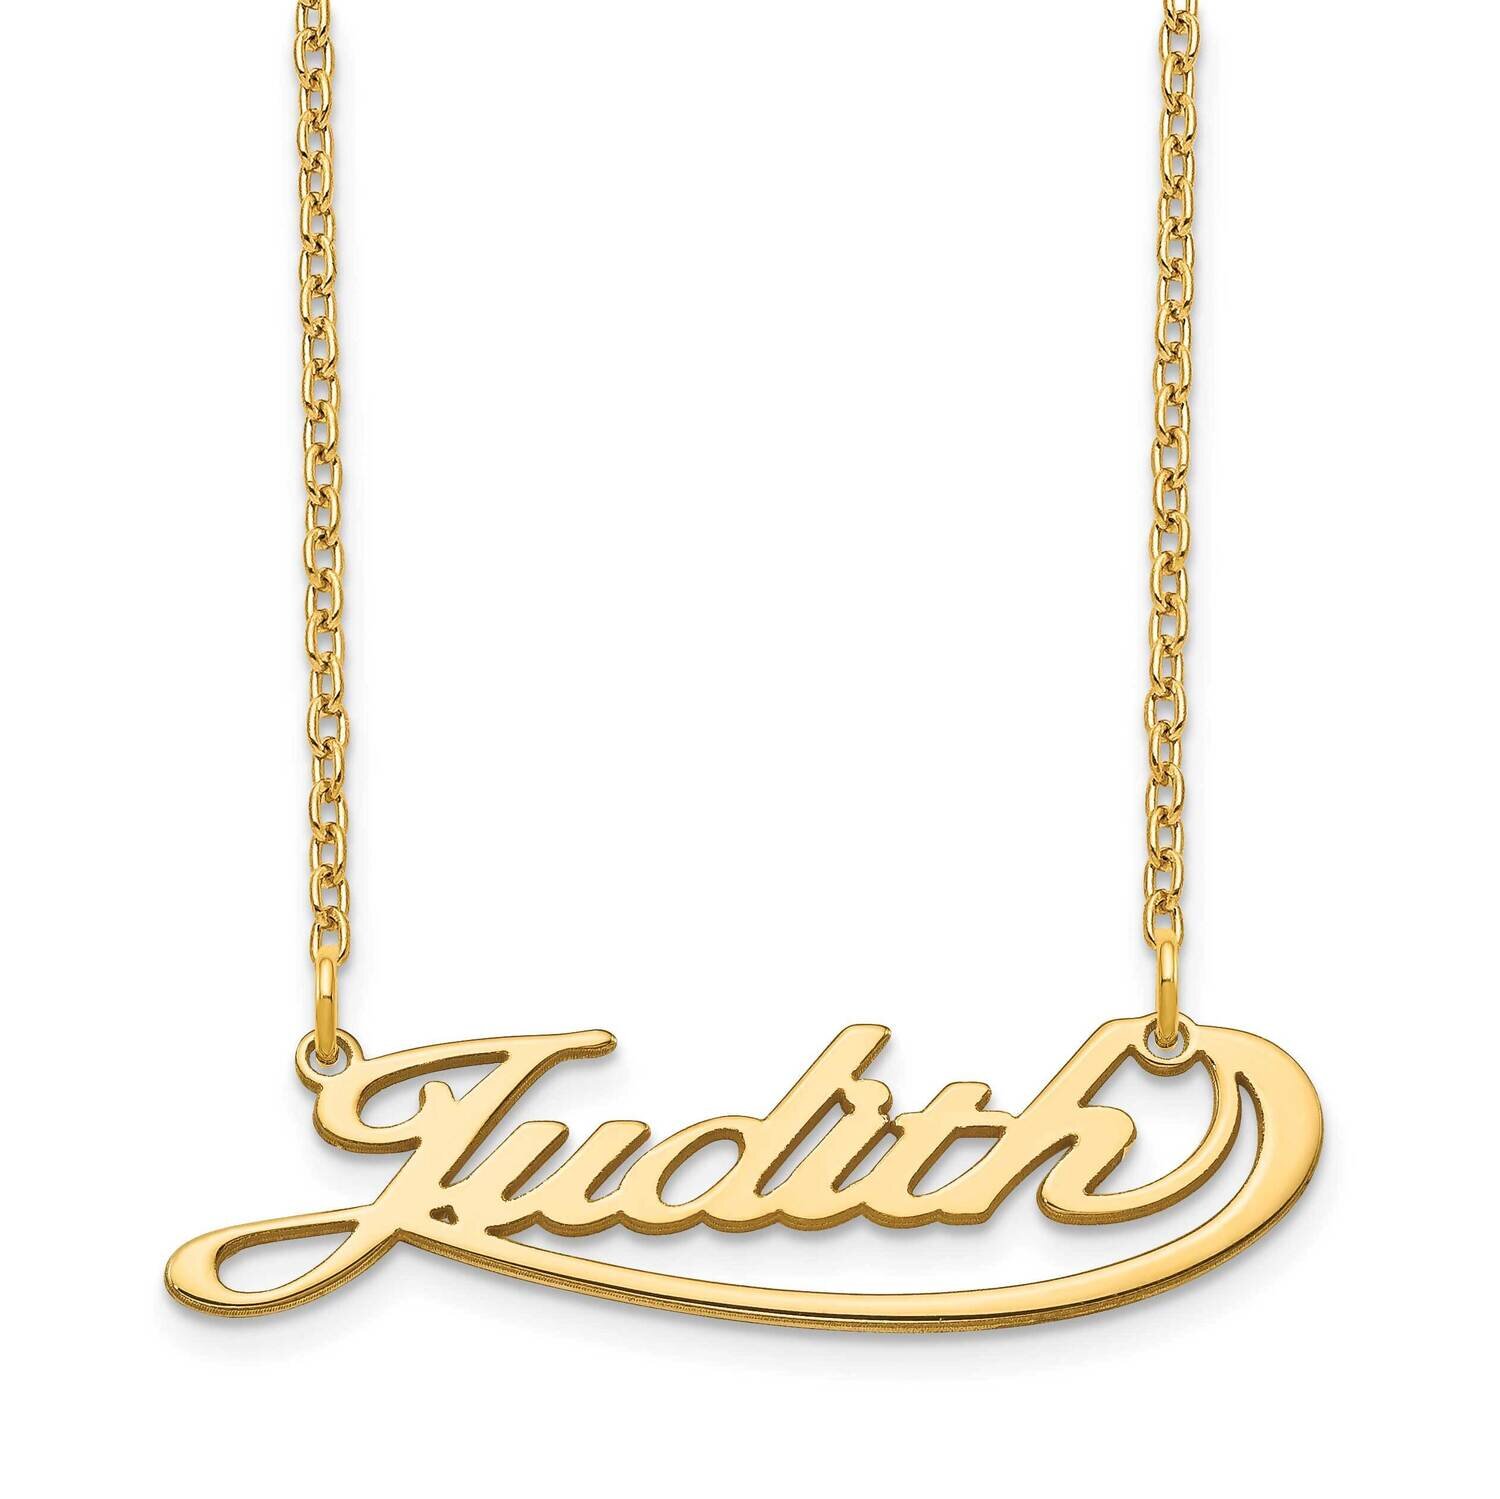 Under Swoop Nameplate Necklace Gold-plated XNA946GP